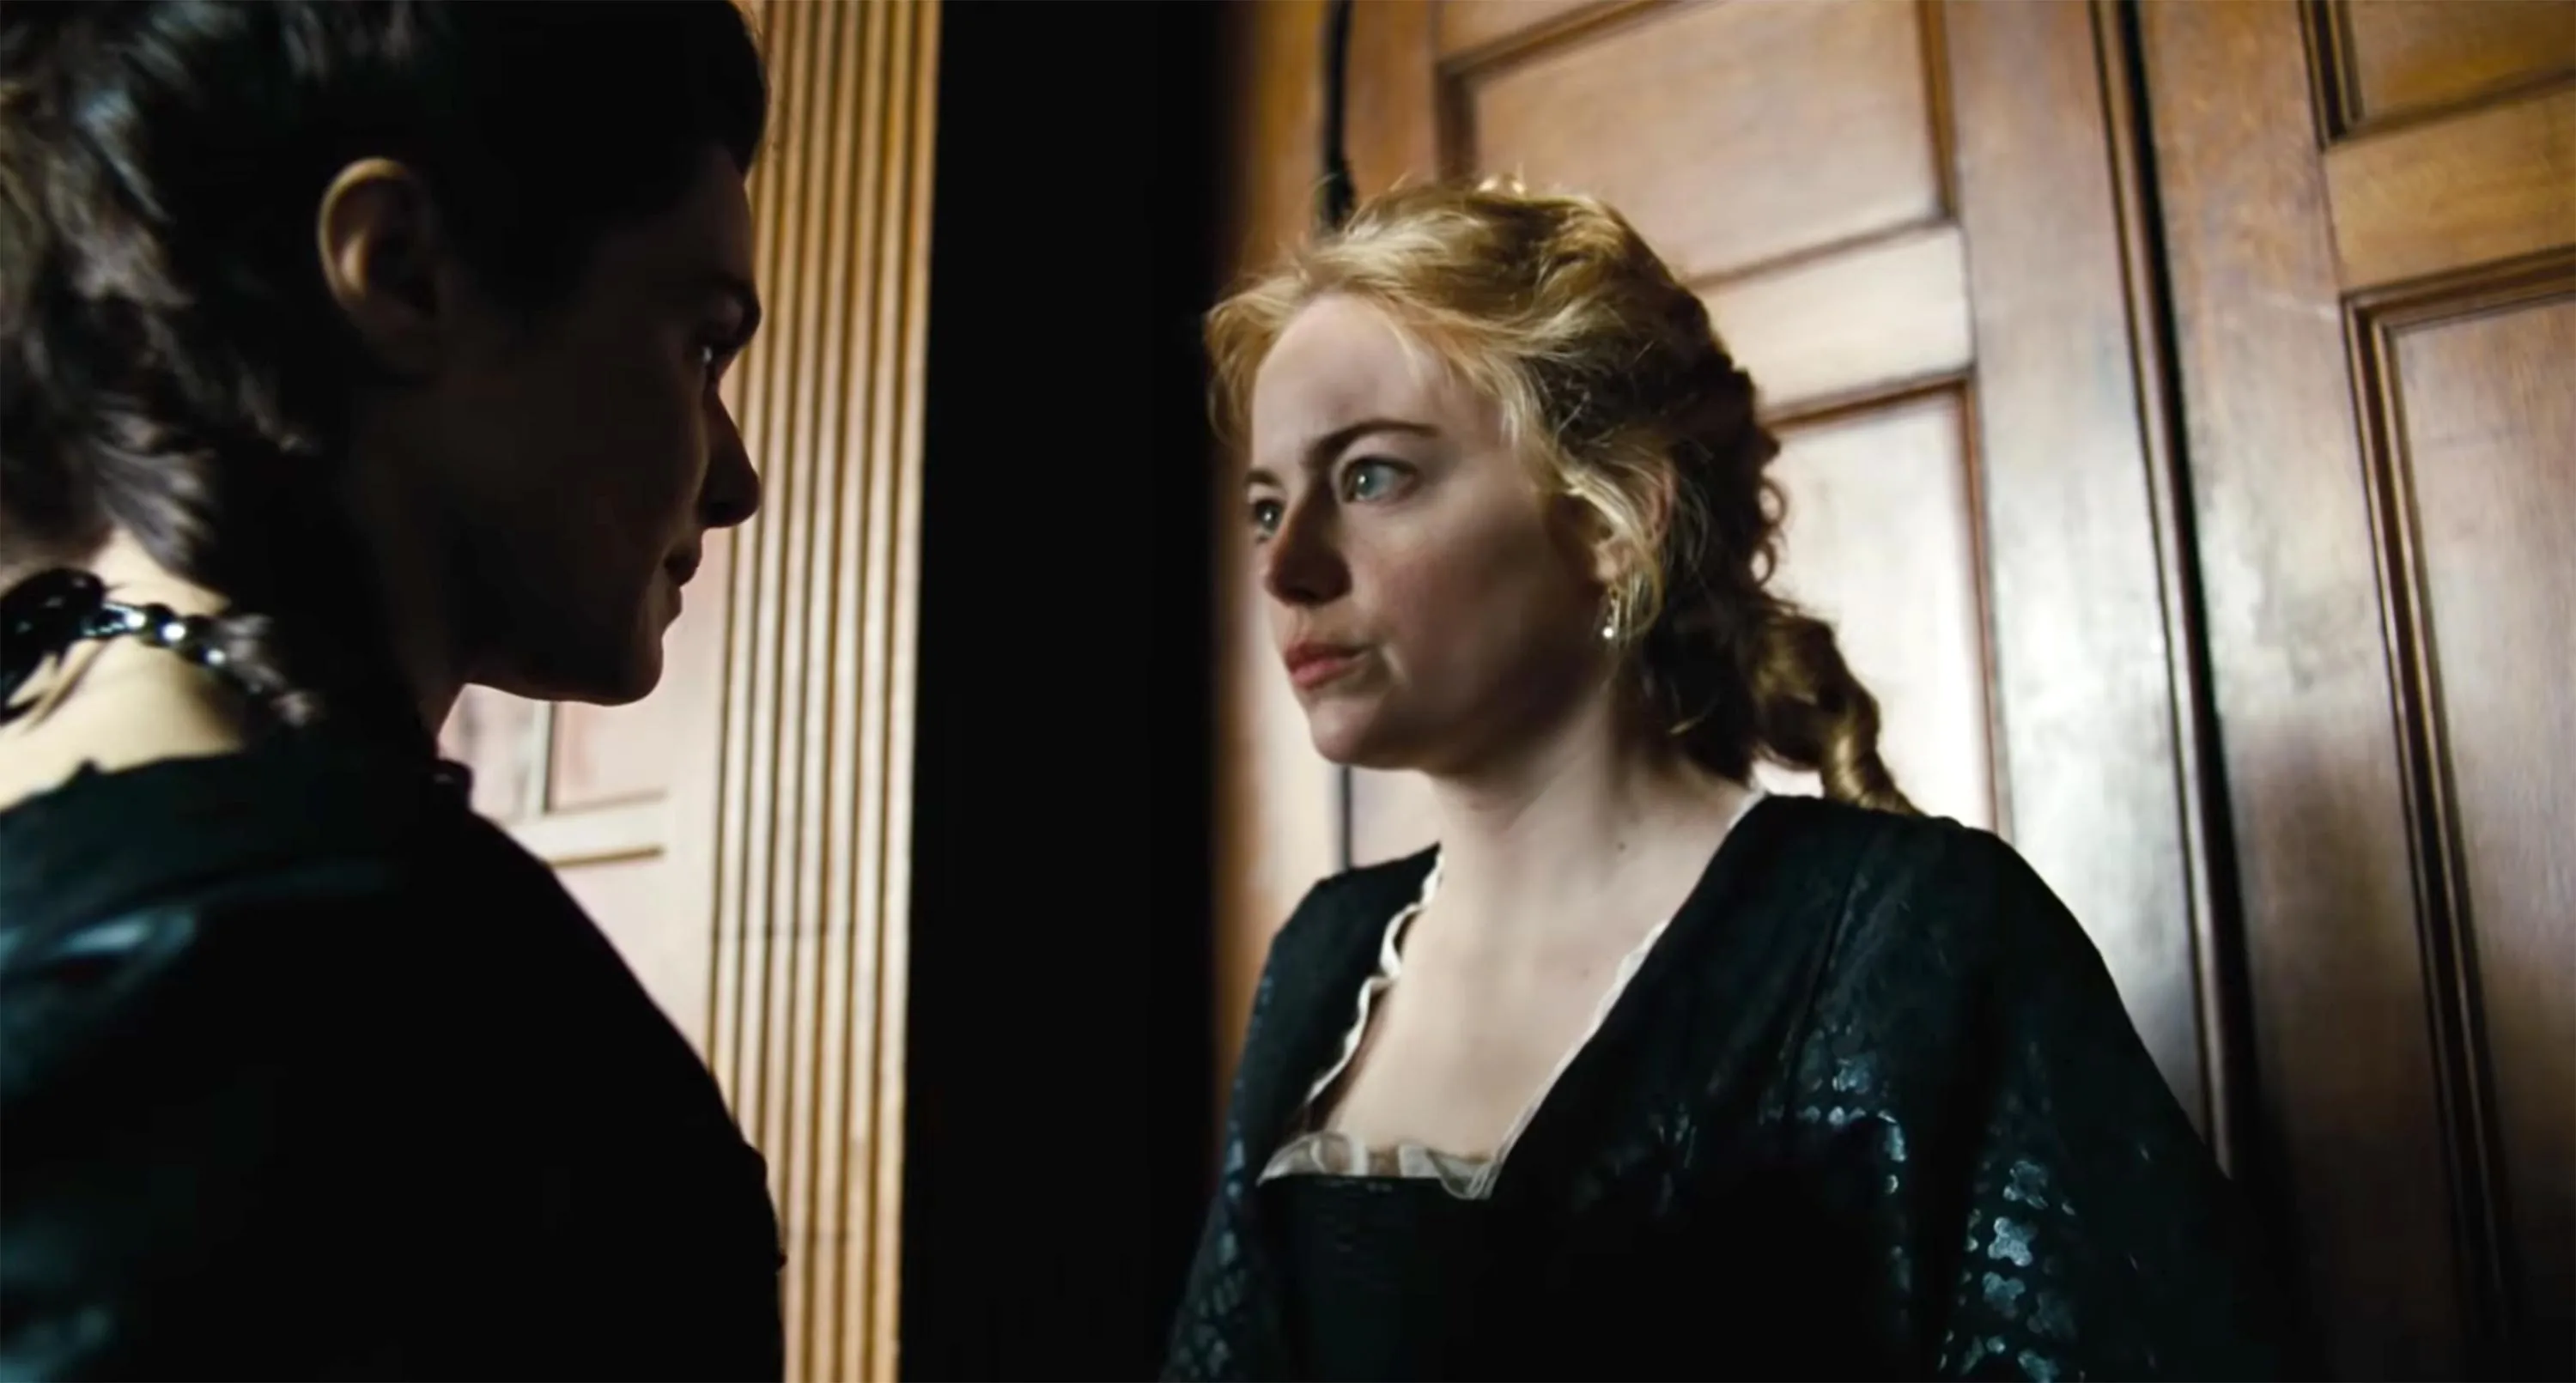 Emma Stone Porn - Emma Stone insisted on being naked in lesbian film The Favourite | PinkNews